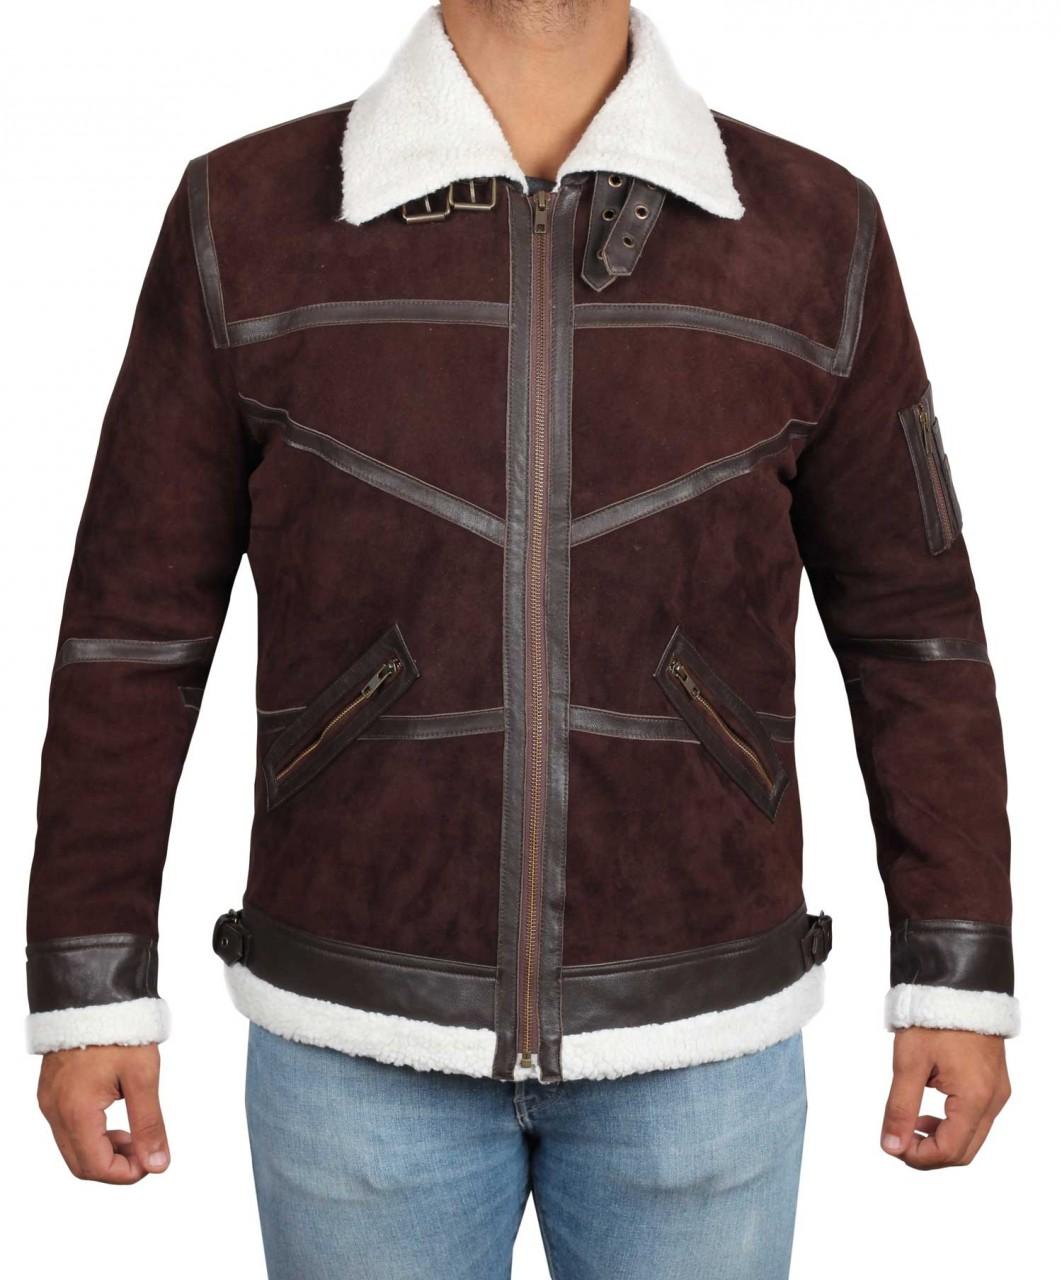 50 Cent Shearling Leather Jacket - A2 Jackets